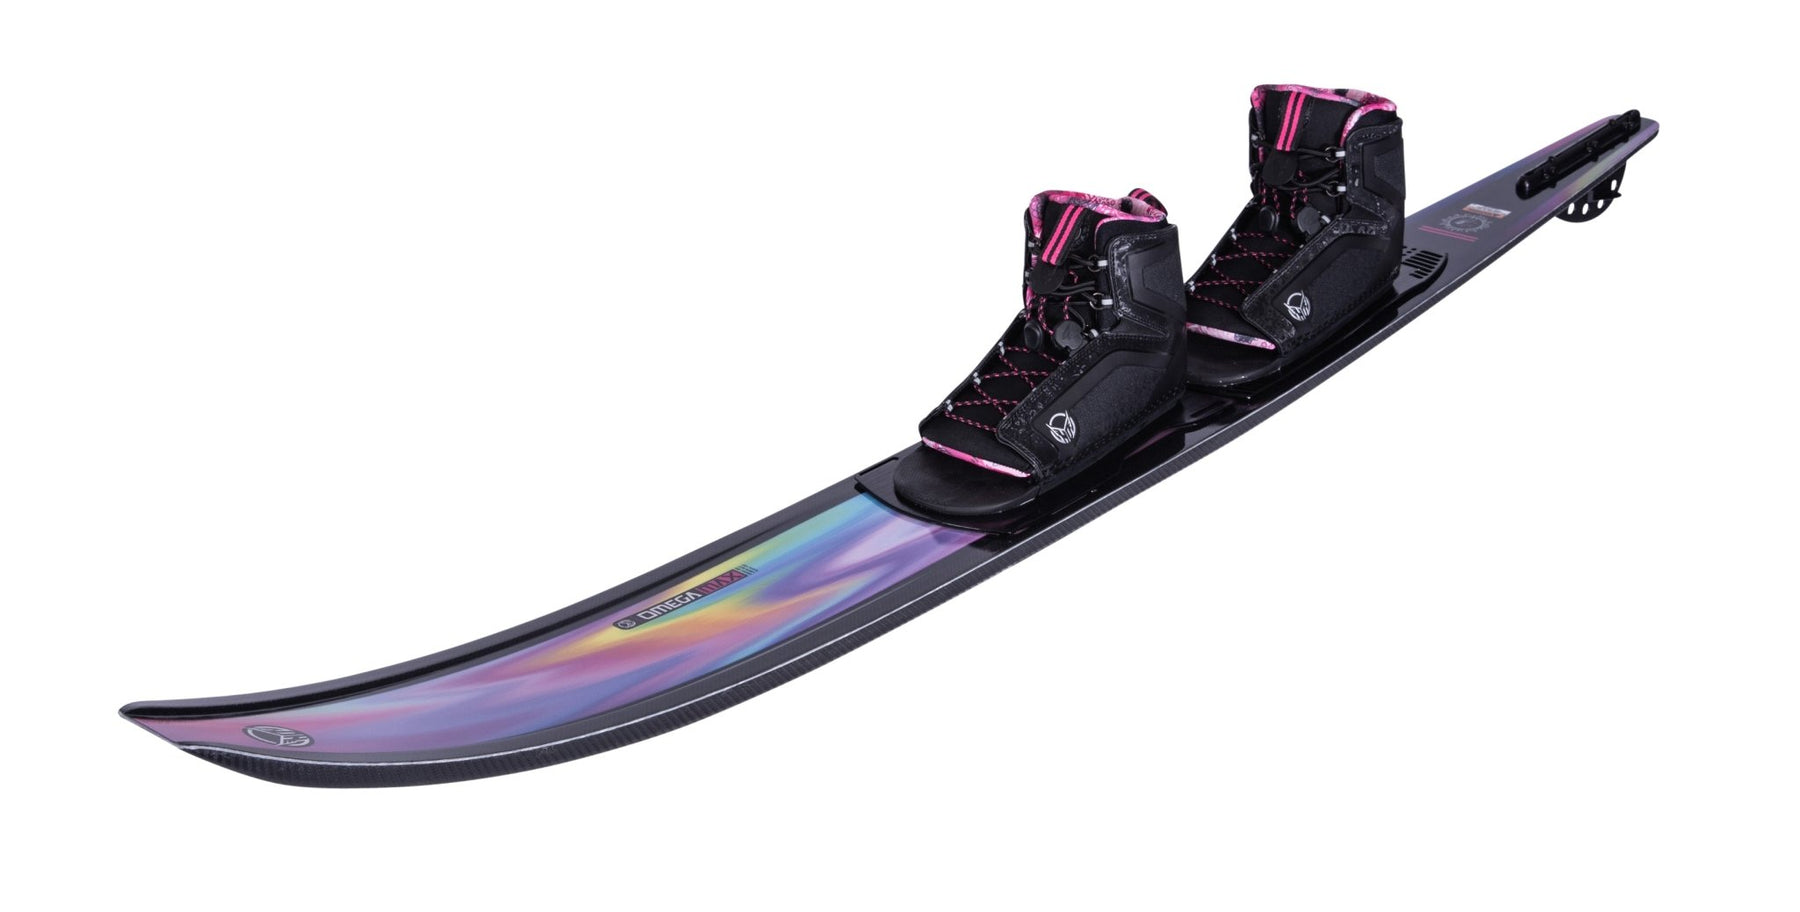 HO Womens Carbon Omega Max w/Stance 110 Dbl 2022 - BoardCo